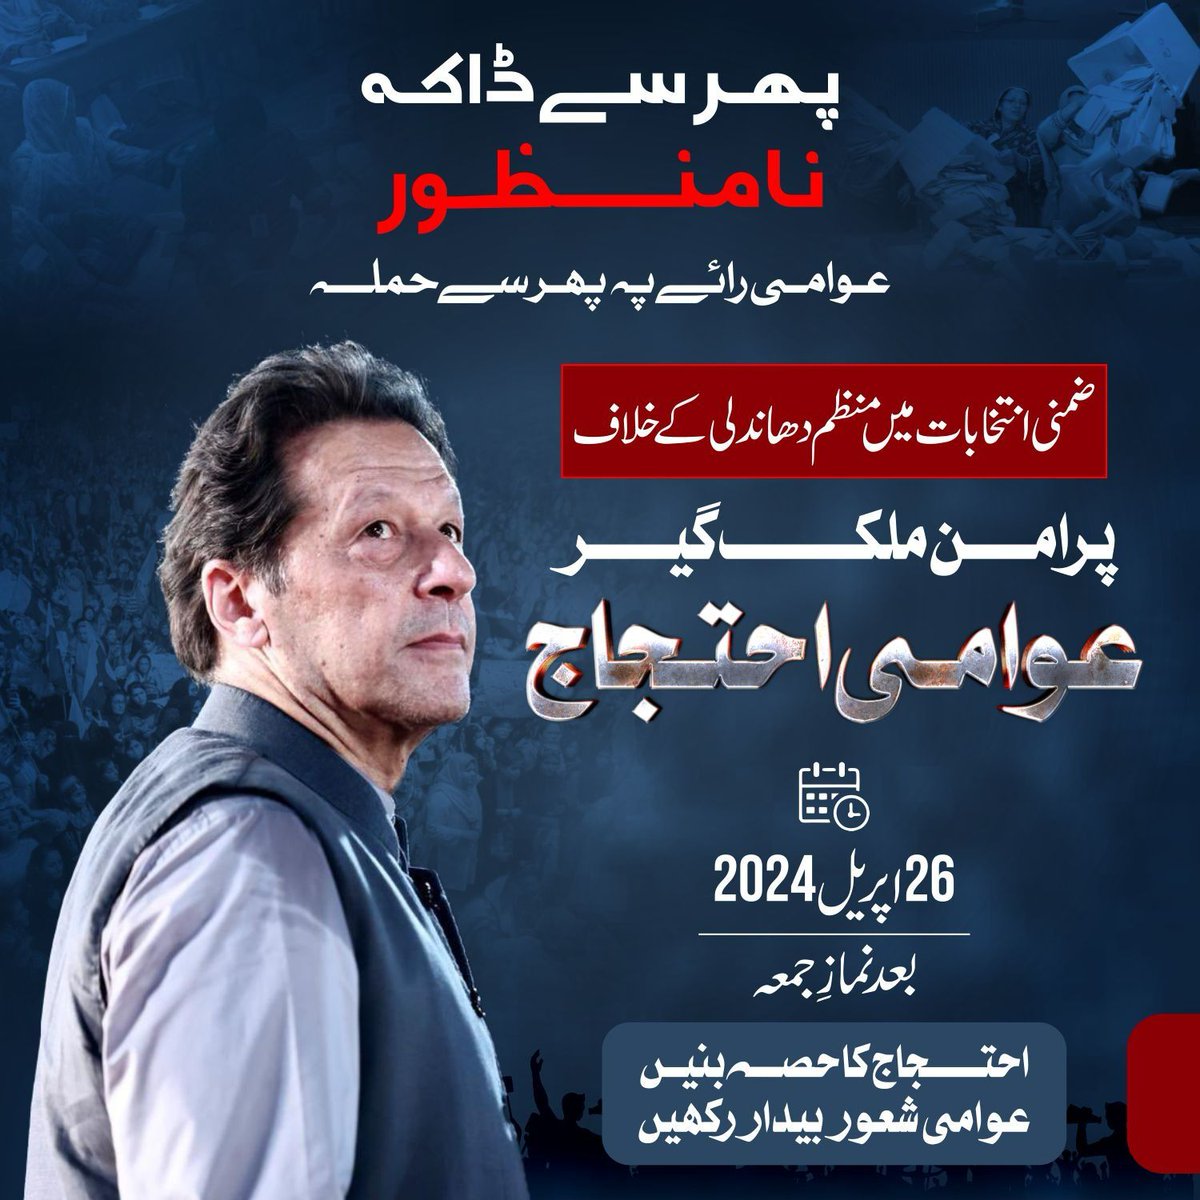 Nationwide Protests planned for this Friday , please share this with all your friends and family in Pakistan and also post on your social media accounts
#قوم_کی_جان_کو_رہاکرو #خان_کےلیے_عوام_نکلے